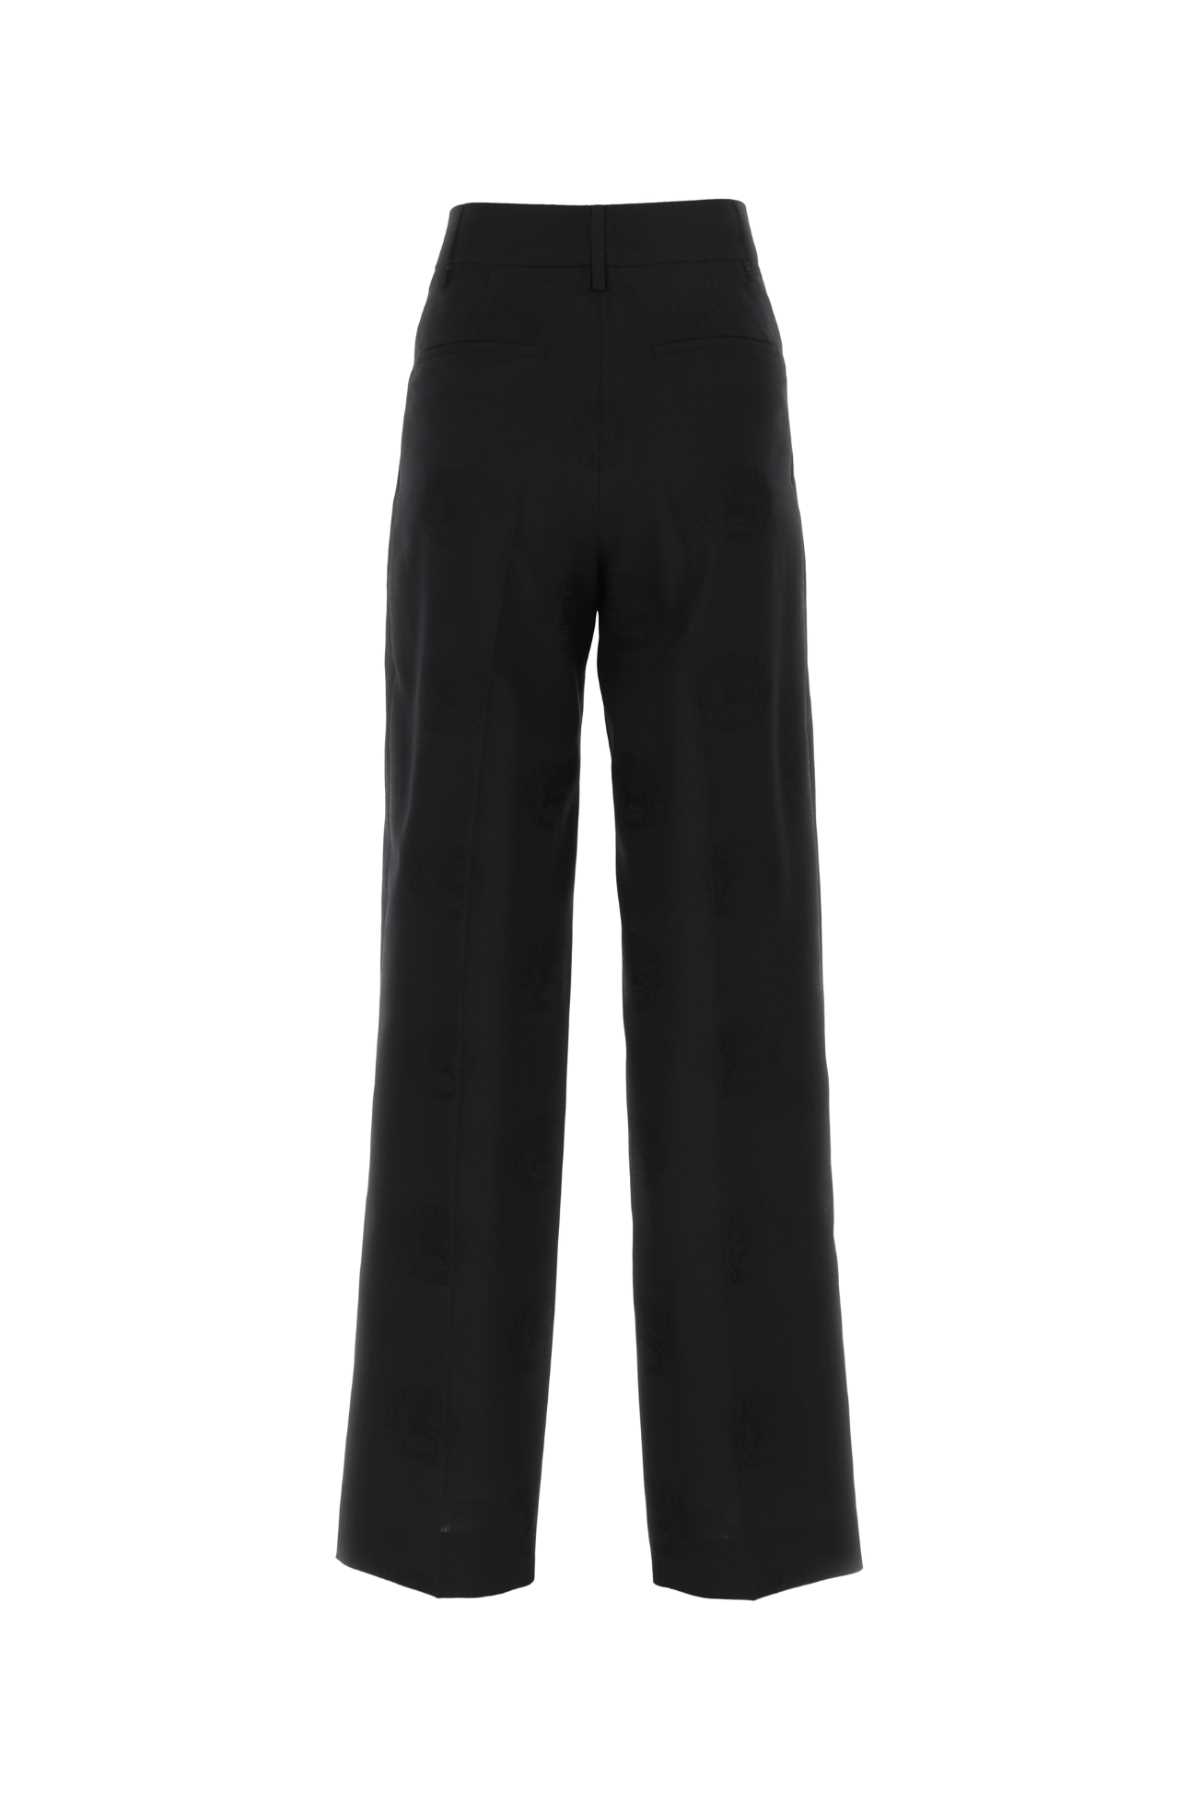 Burberry Black Wool Blend Wide-leg Pant In A1931